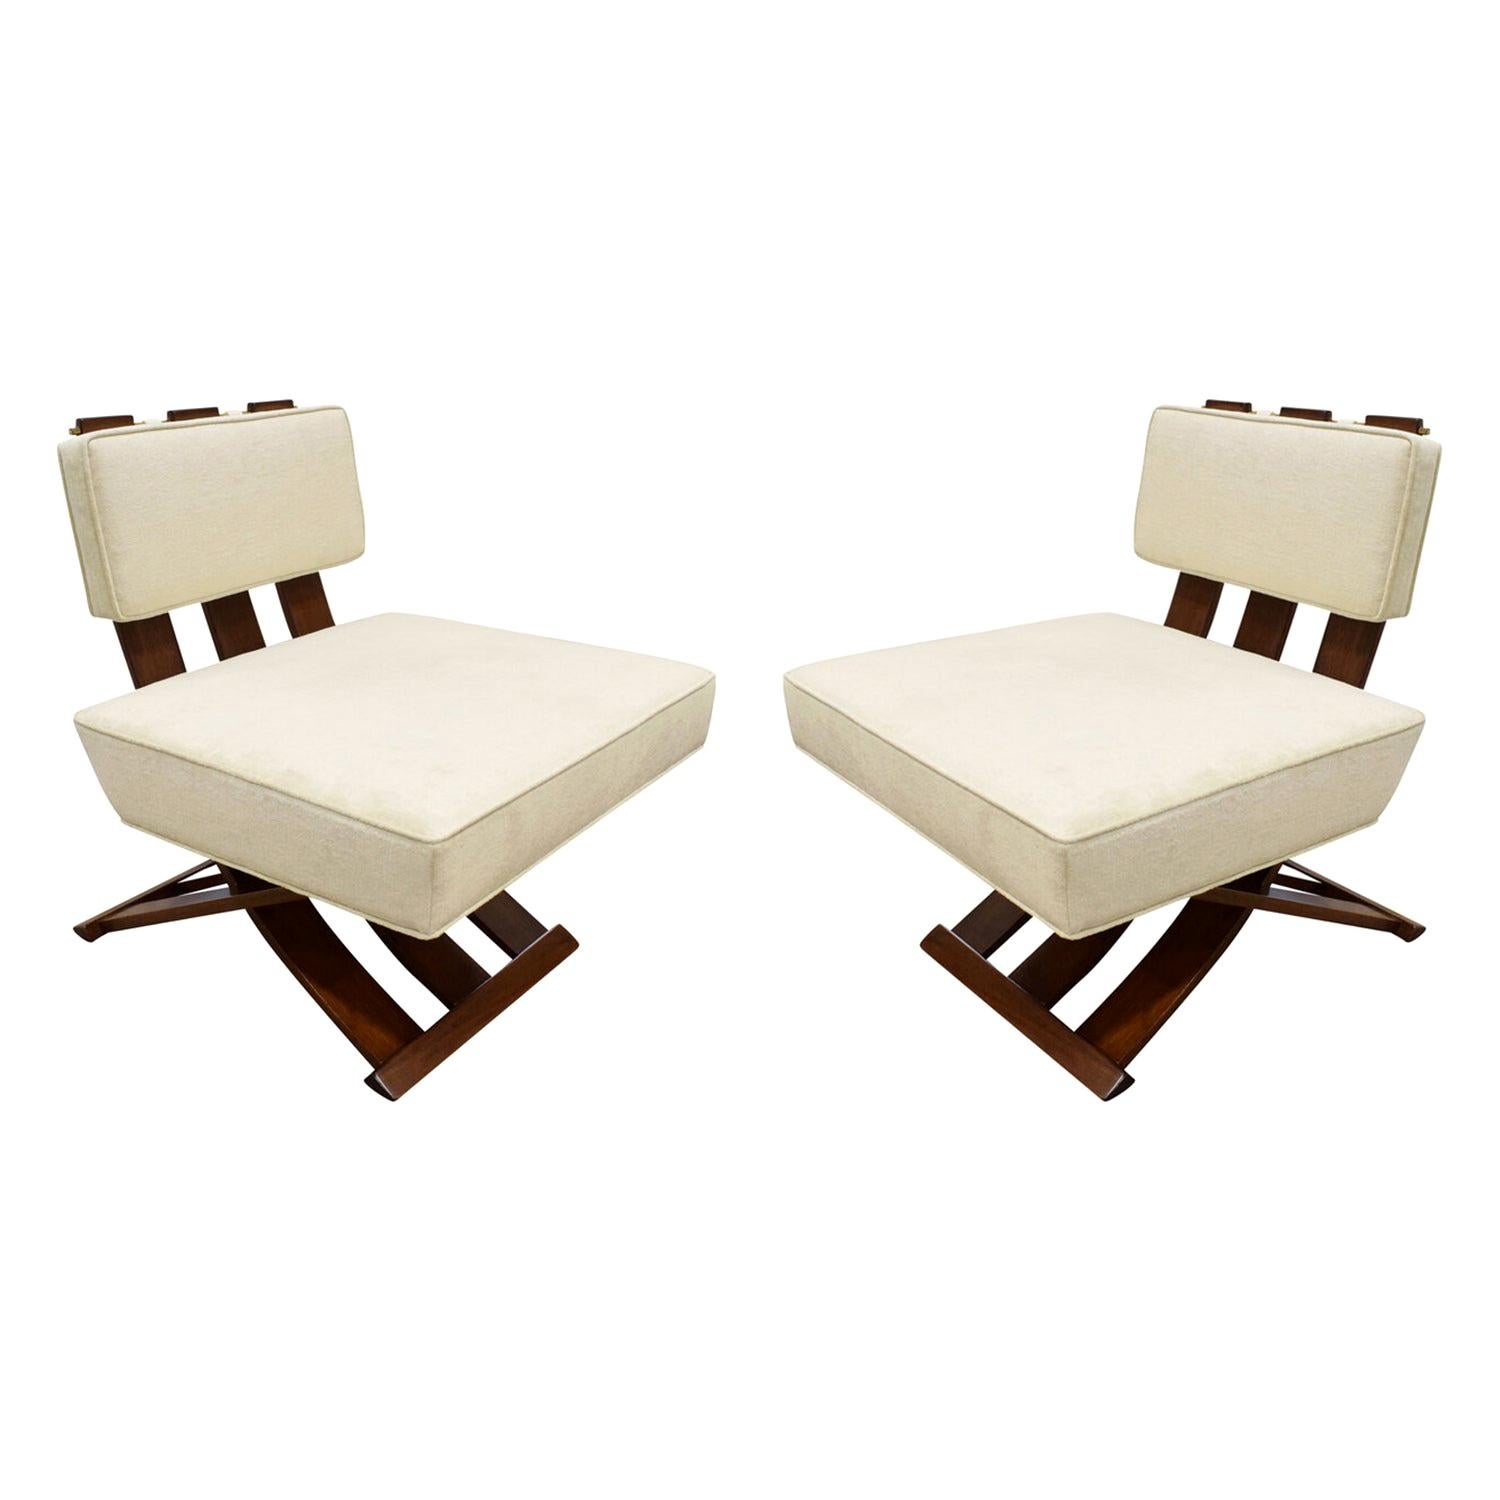 Harvey Probber Elegant Pair of Campaign Style Lounge Chairs 1950s